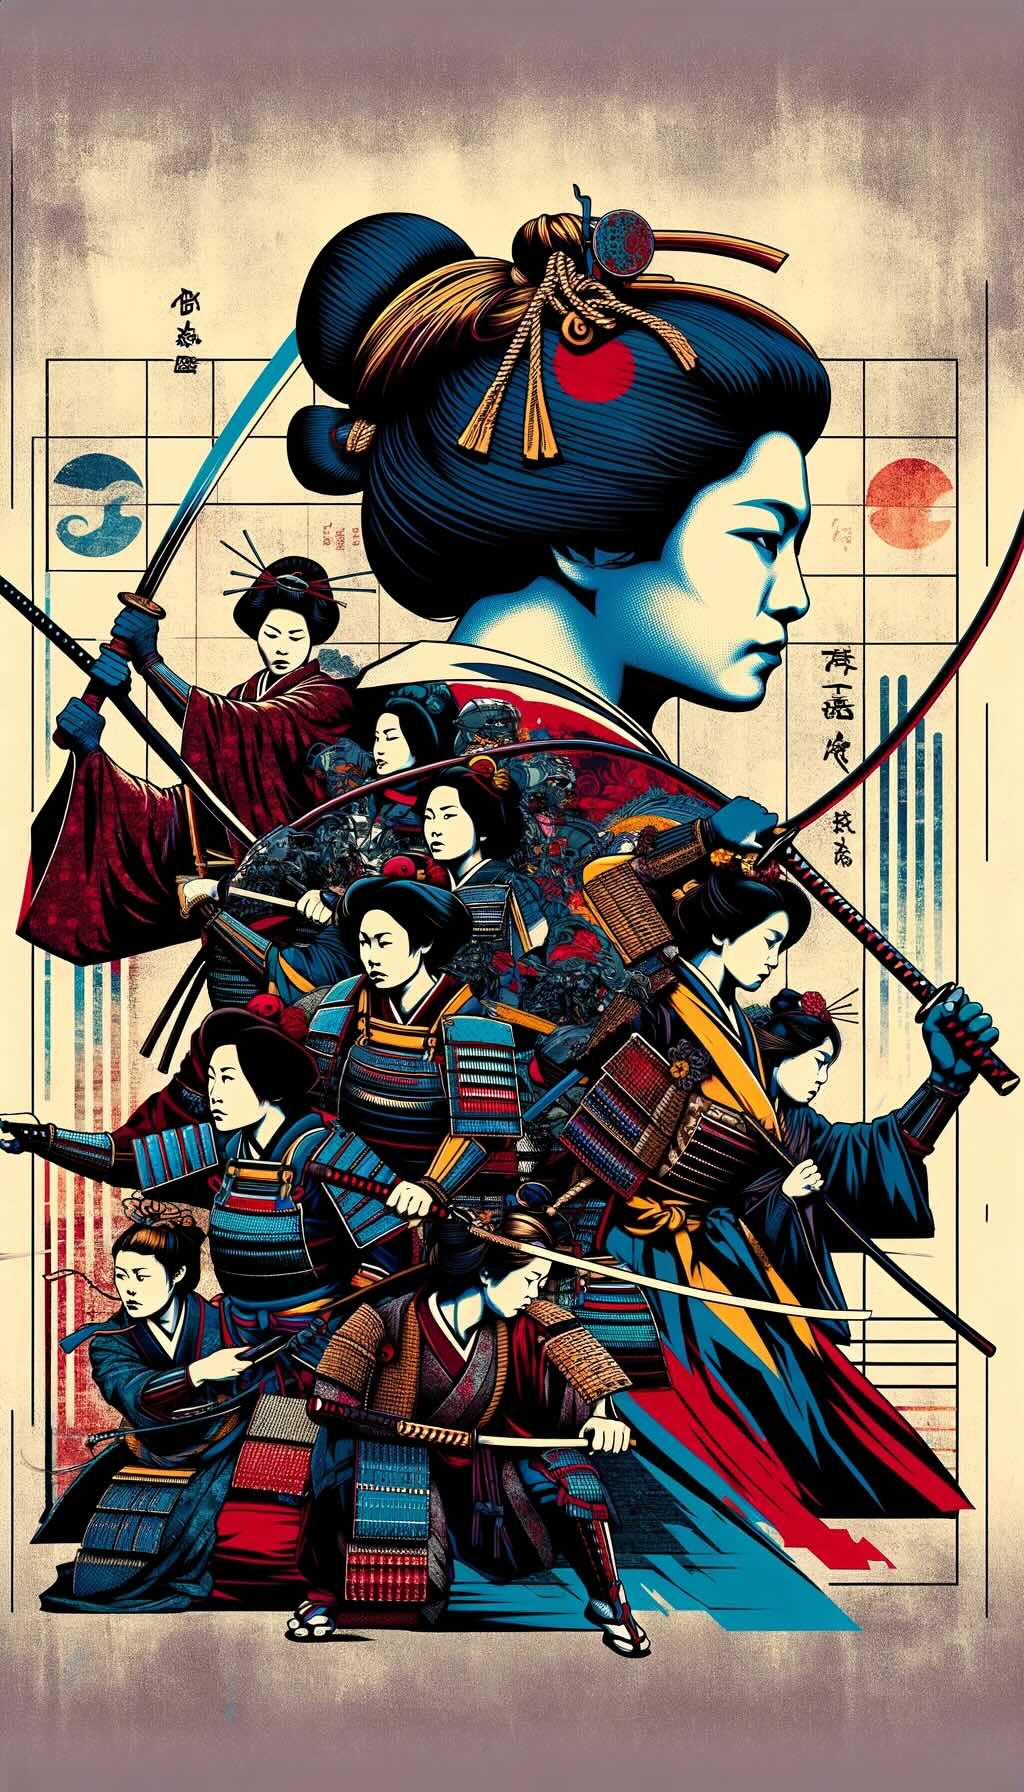 Significant role of women in samurai culture. It showcases representations of onna-bugeisha, highlighting their skills in warfare and featuring iconic figures like Tomoe Gozen and Nakano Takeko. The image also illustrates the shift in women's roles during the Edo period and their enduring legacy as custodians of samurai values. The fusion of abstract and vibrant elements in the artwork reflects the resilience and significance of women in the samurai era, as well as their lasting influence in Japanese folklore and history